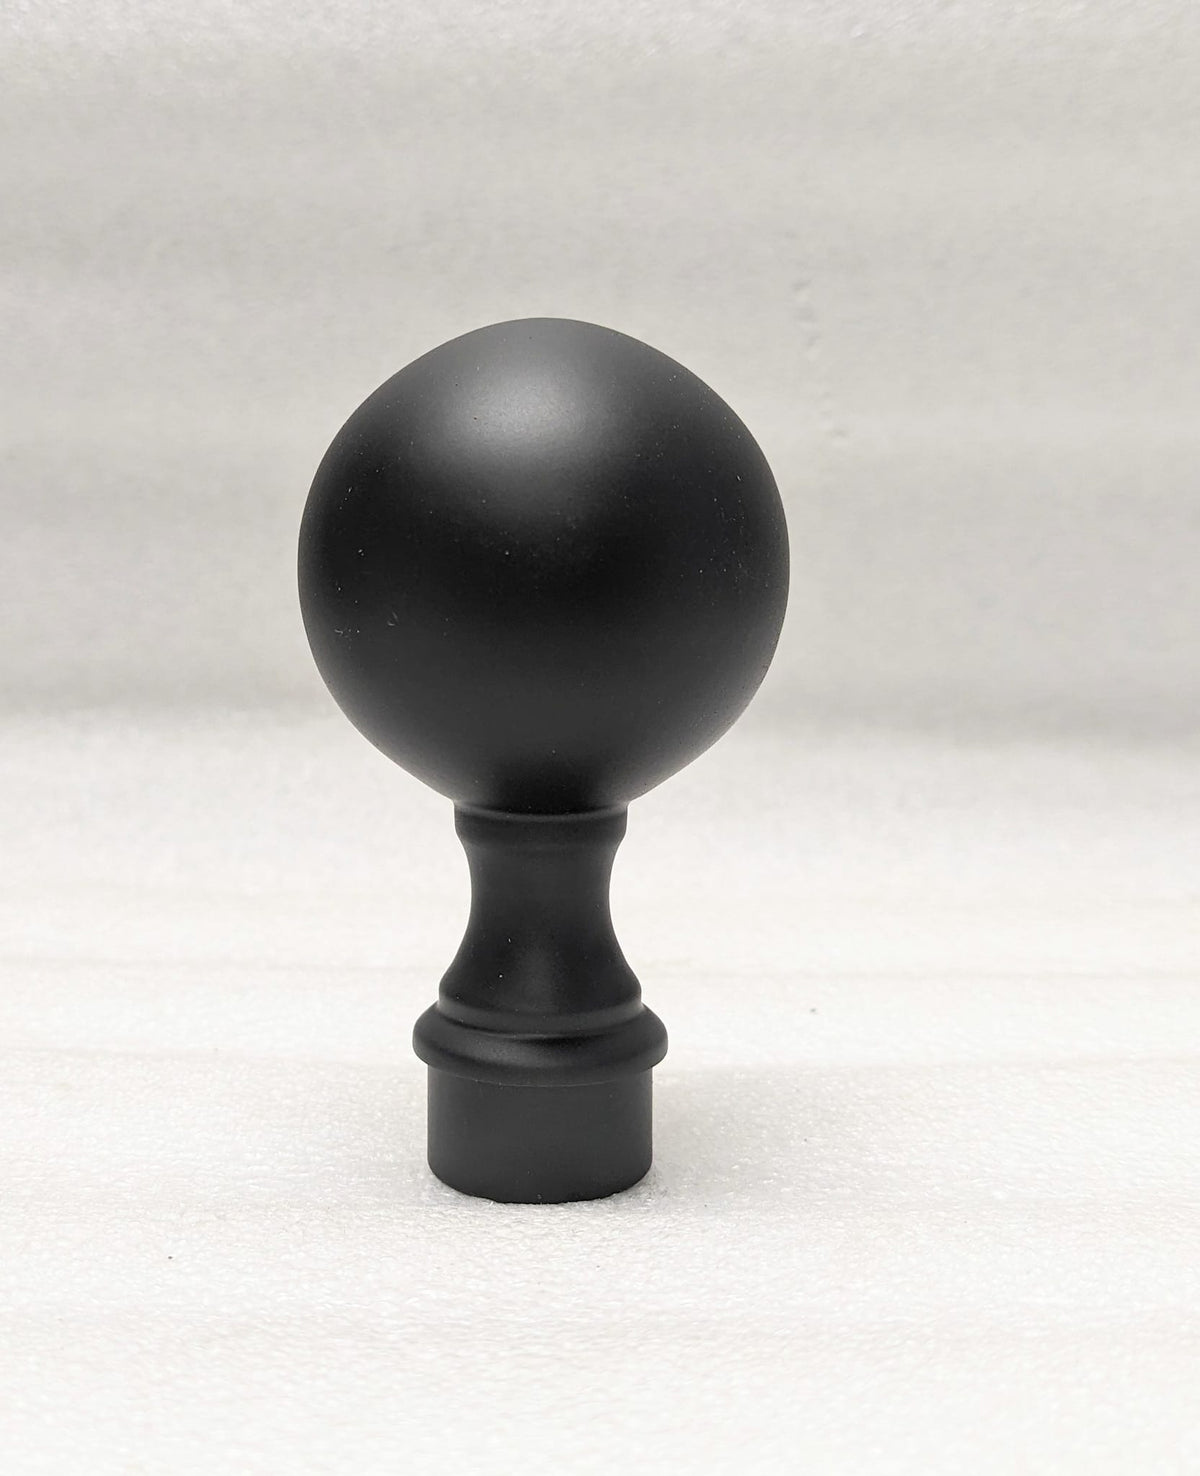 Ball Finial for 1-1/2" OD Tubing End Caps and Finials, Components for 1-1/2" Od Tubing, Drapery Hardware Matte-Black-Powder-Coated-Finish Trade Diversified